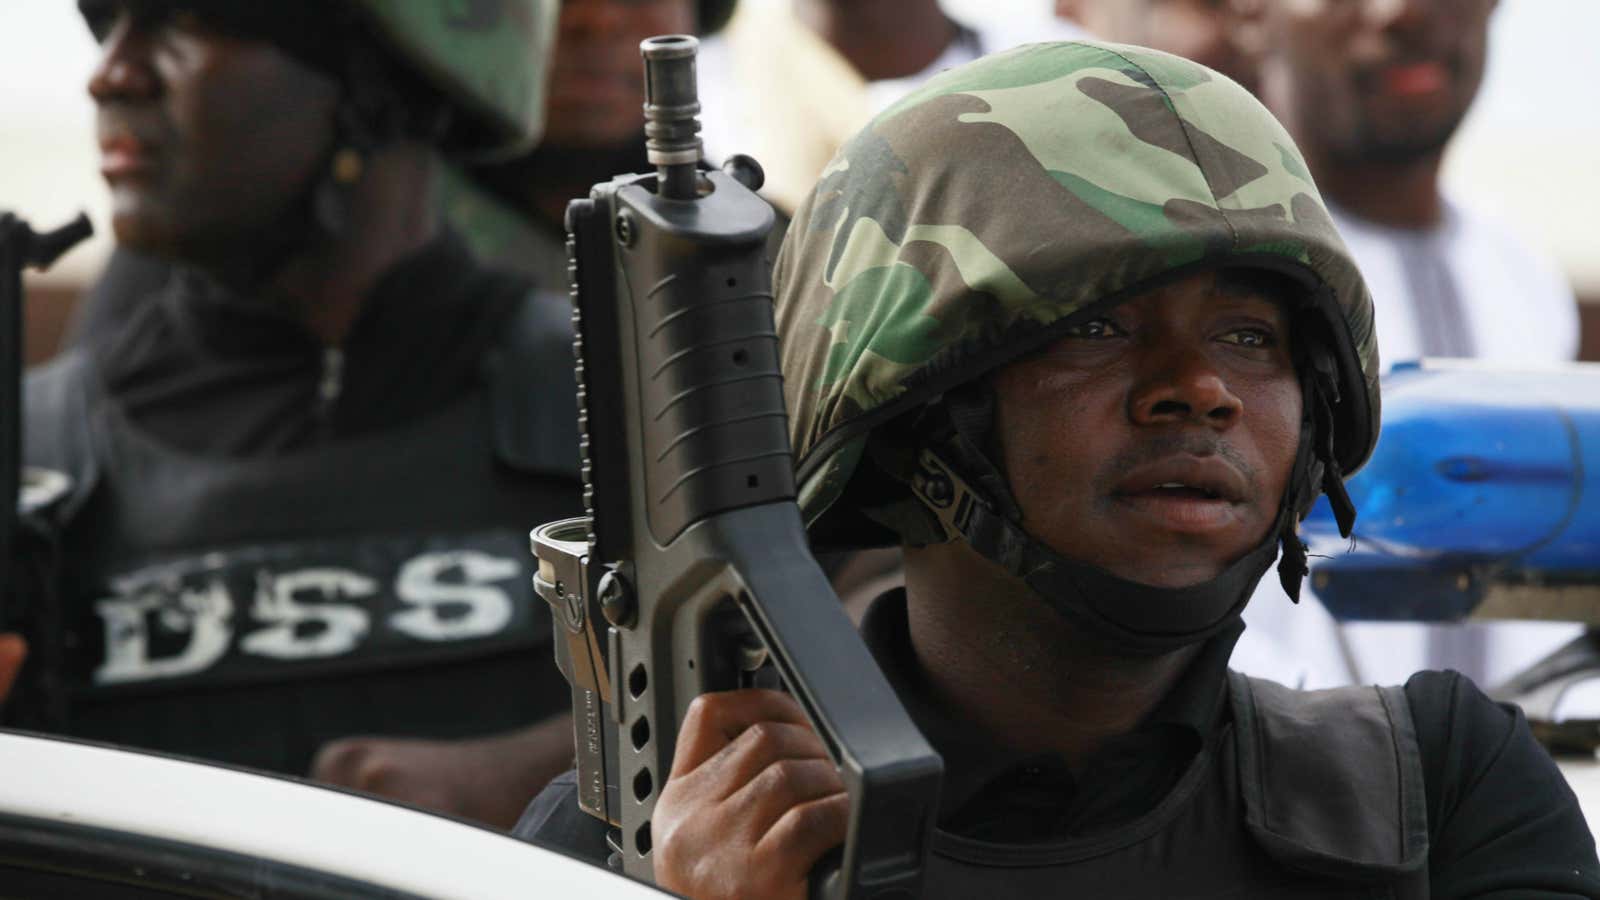 Nigeria military has been accused several high profile cases of human rights abuses